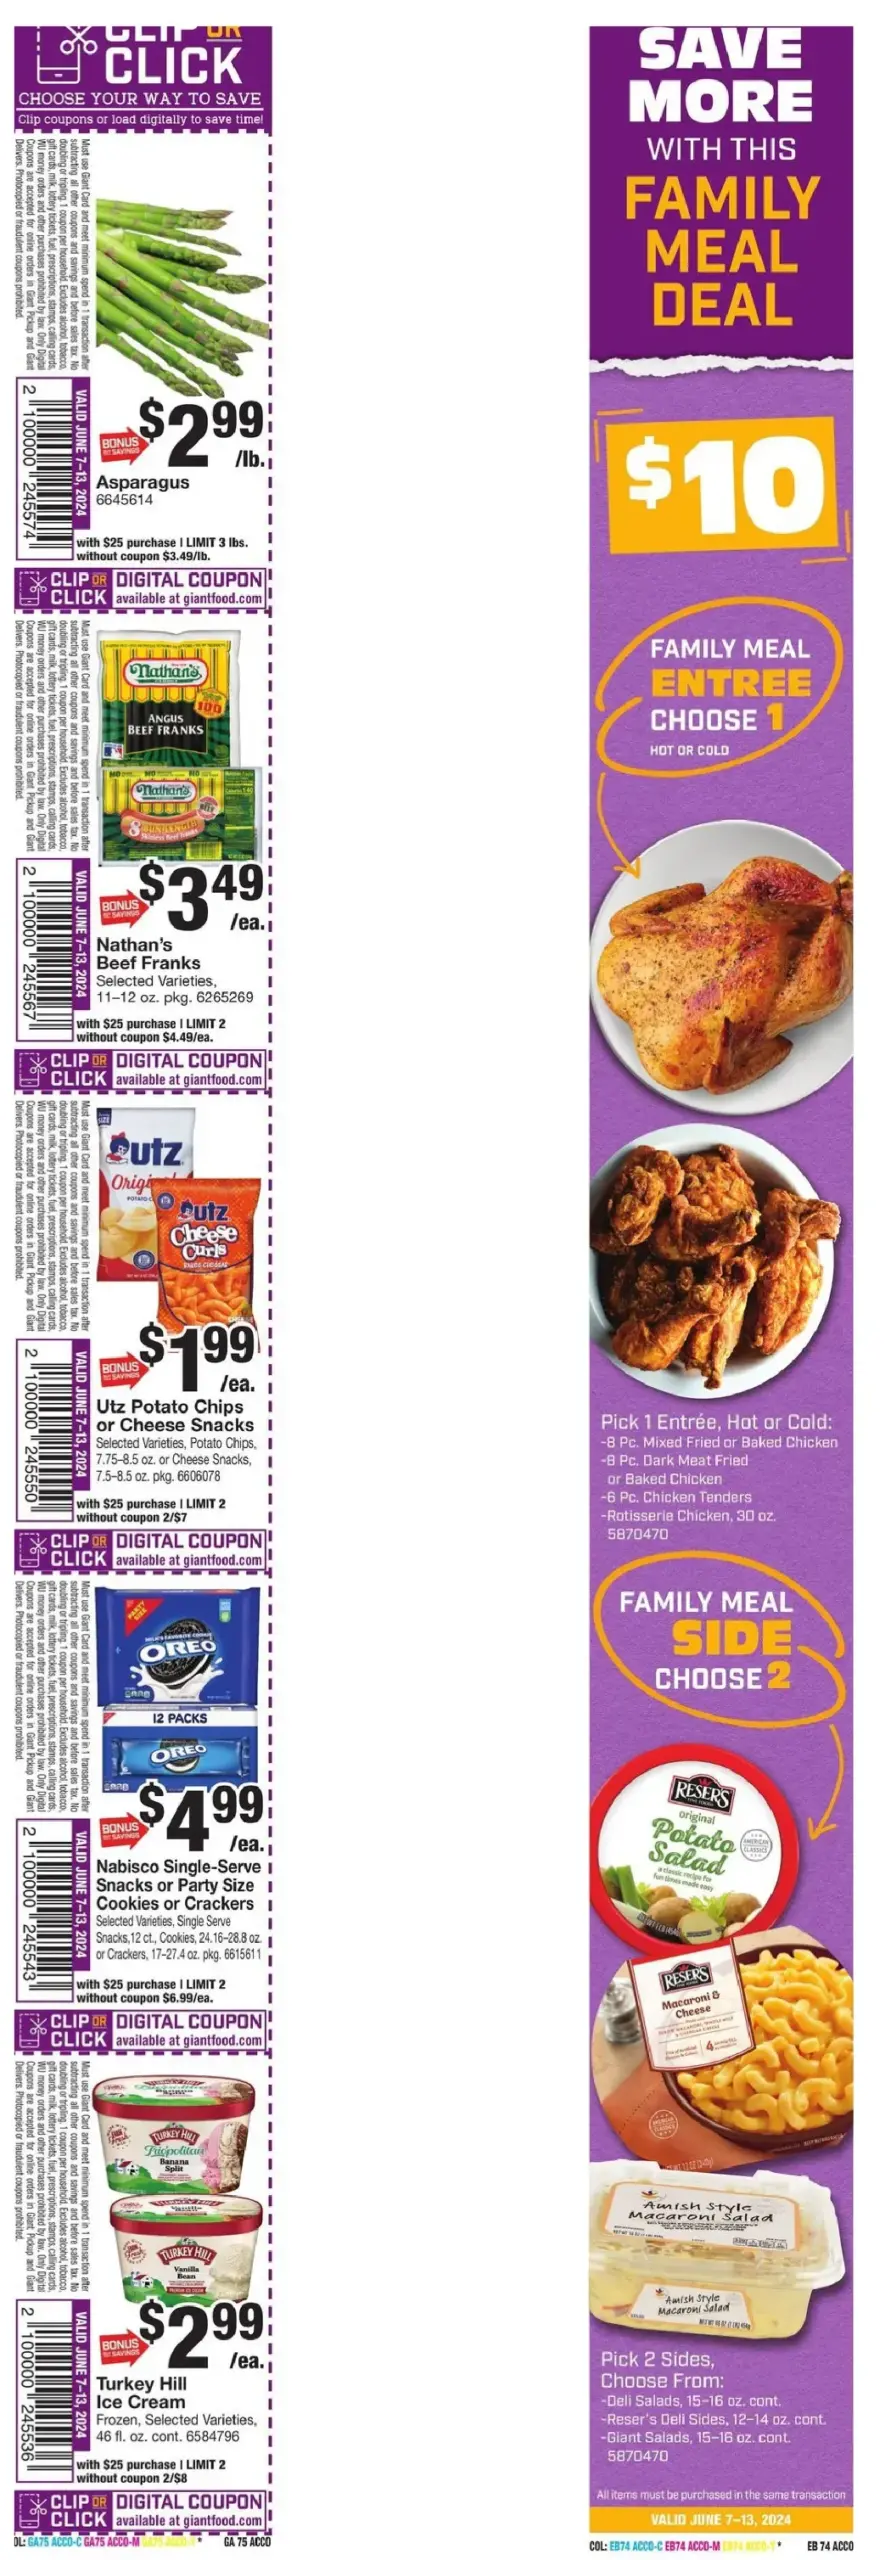 Giant Food July 2024 Weekly Sales, Deals, Discounts and Digital Coupons.